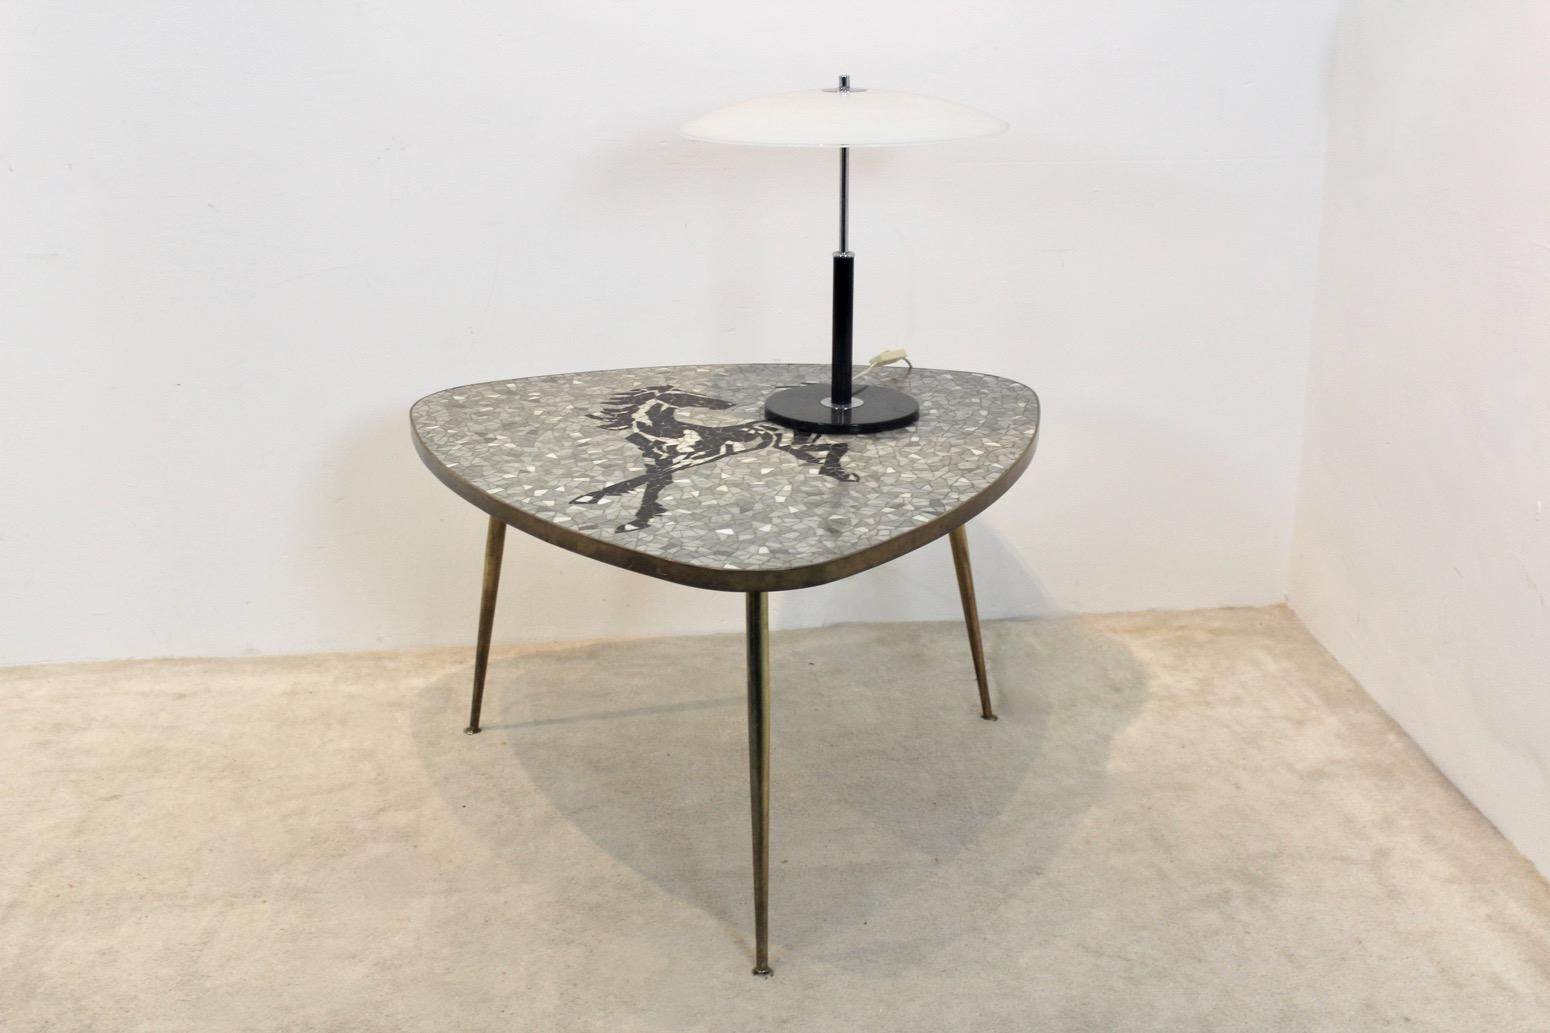 Exquisite Mosaic and Brass Coffee or Side Table by Berthold Müller, 1960s For Sale 3